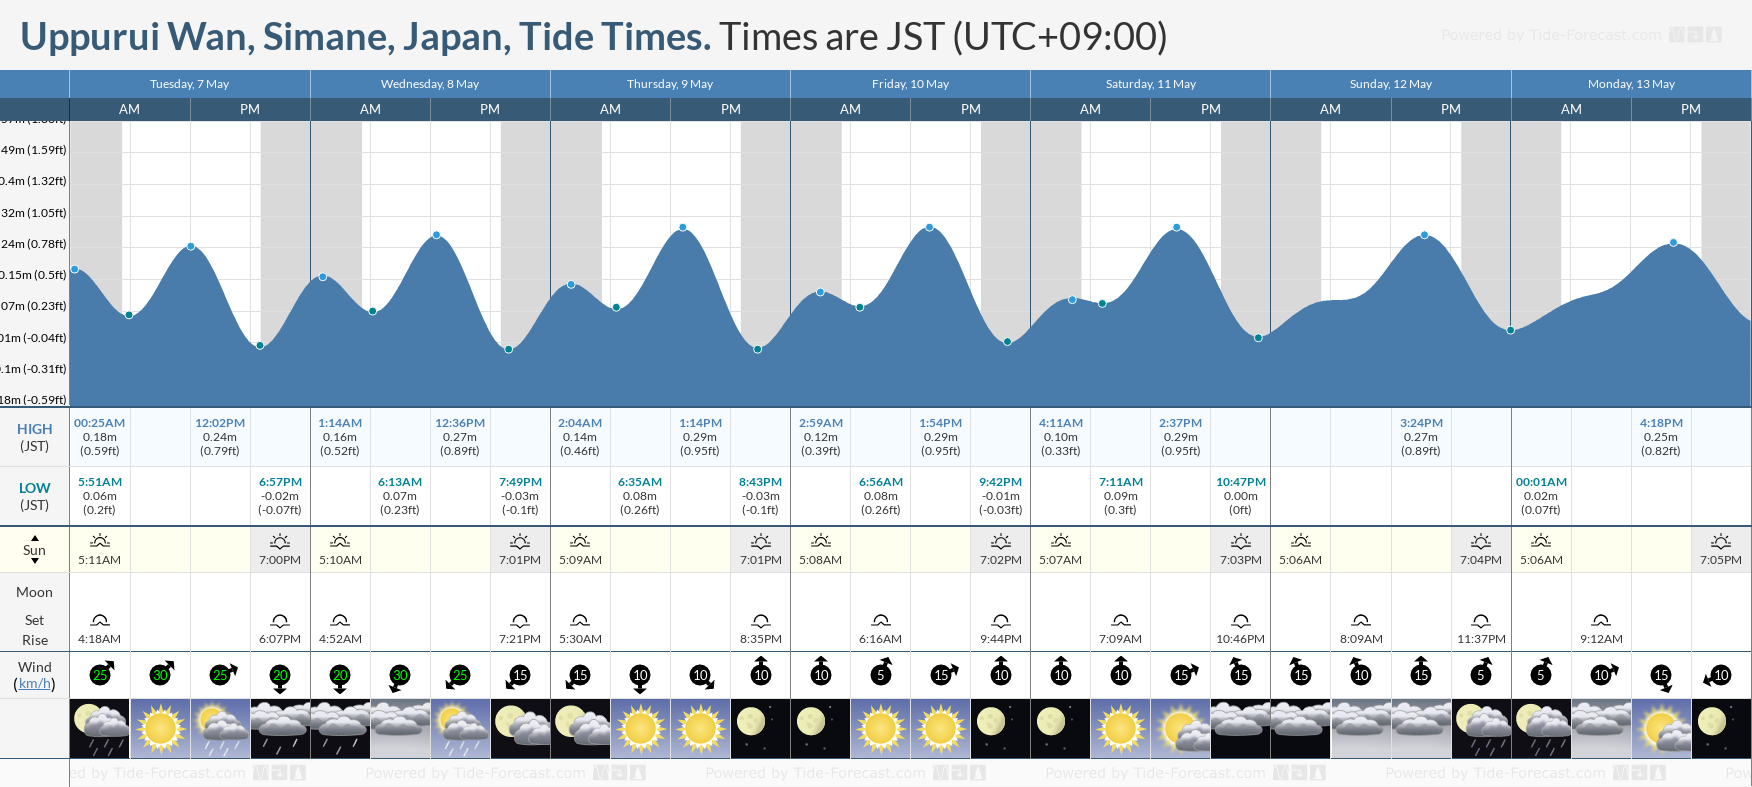 Uppurui Wan, Simane, Japan Tide Chart including high and low tide tide times for the next 7 days